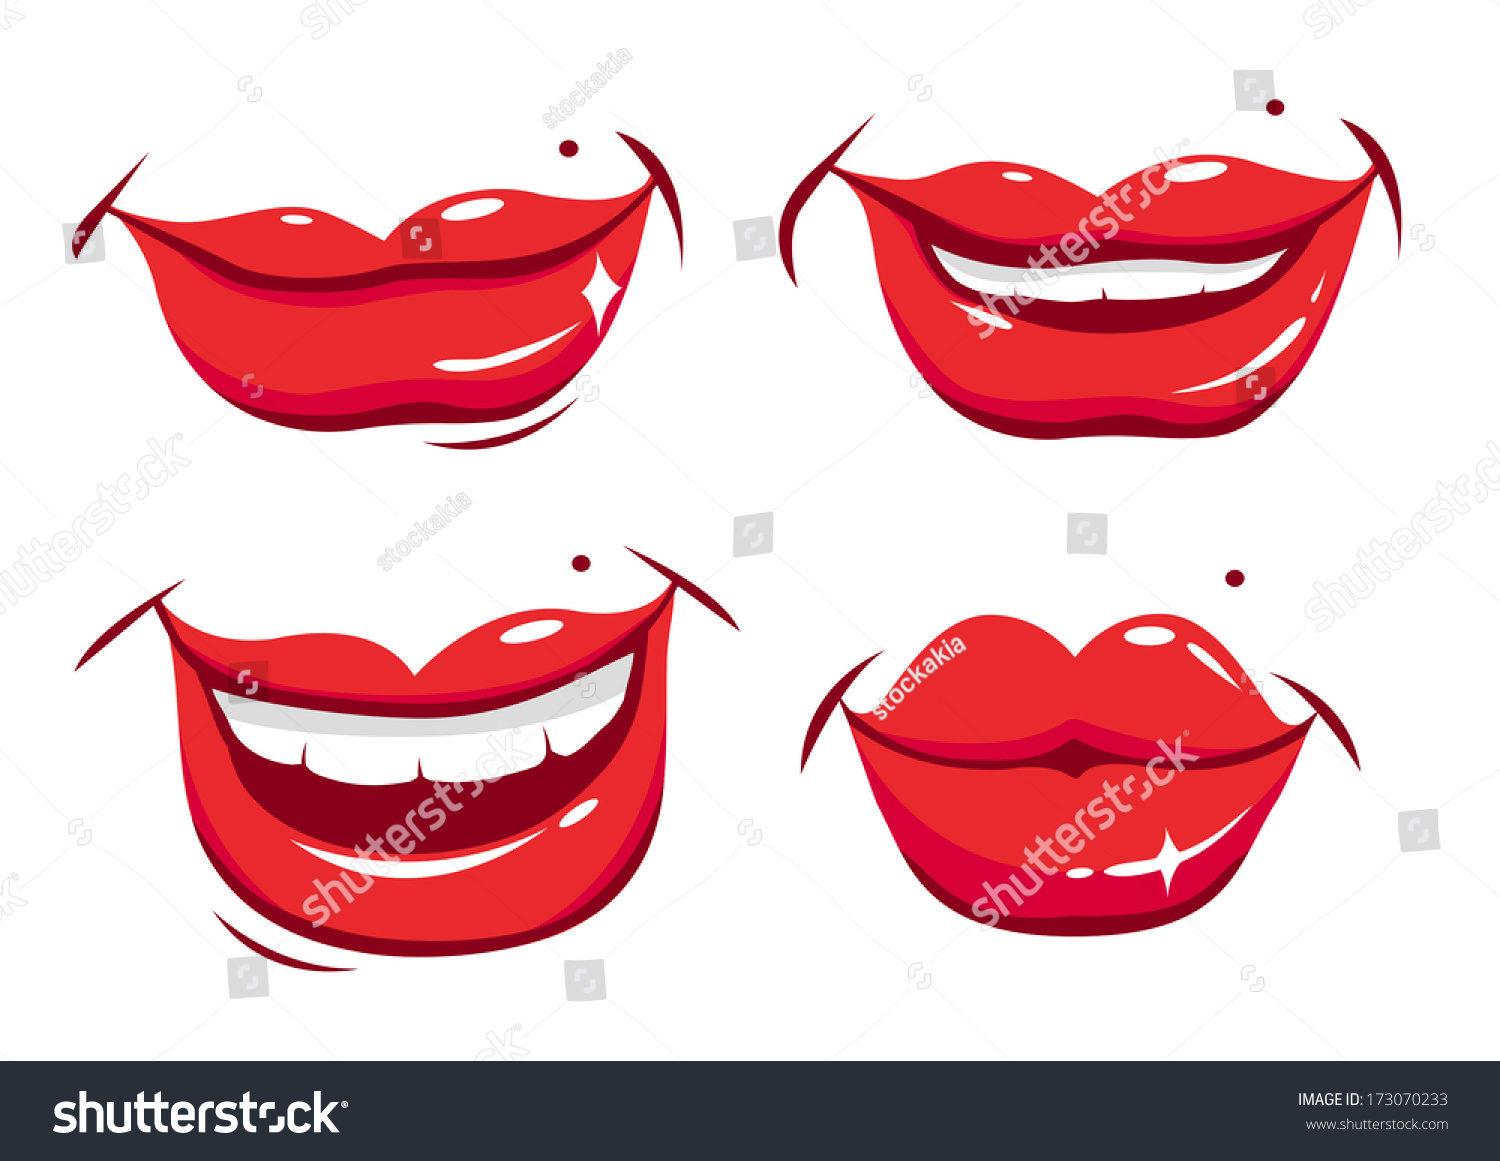 clipart smiley lips - photo #46